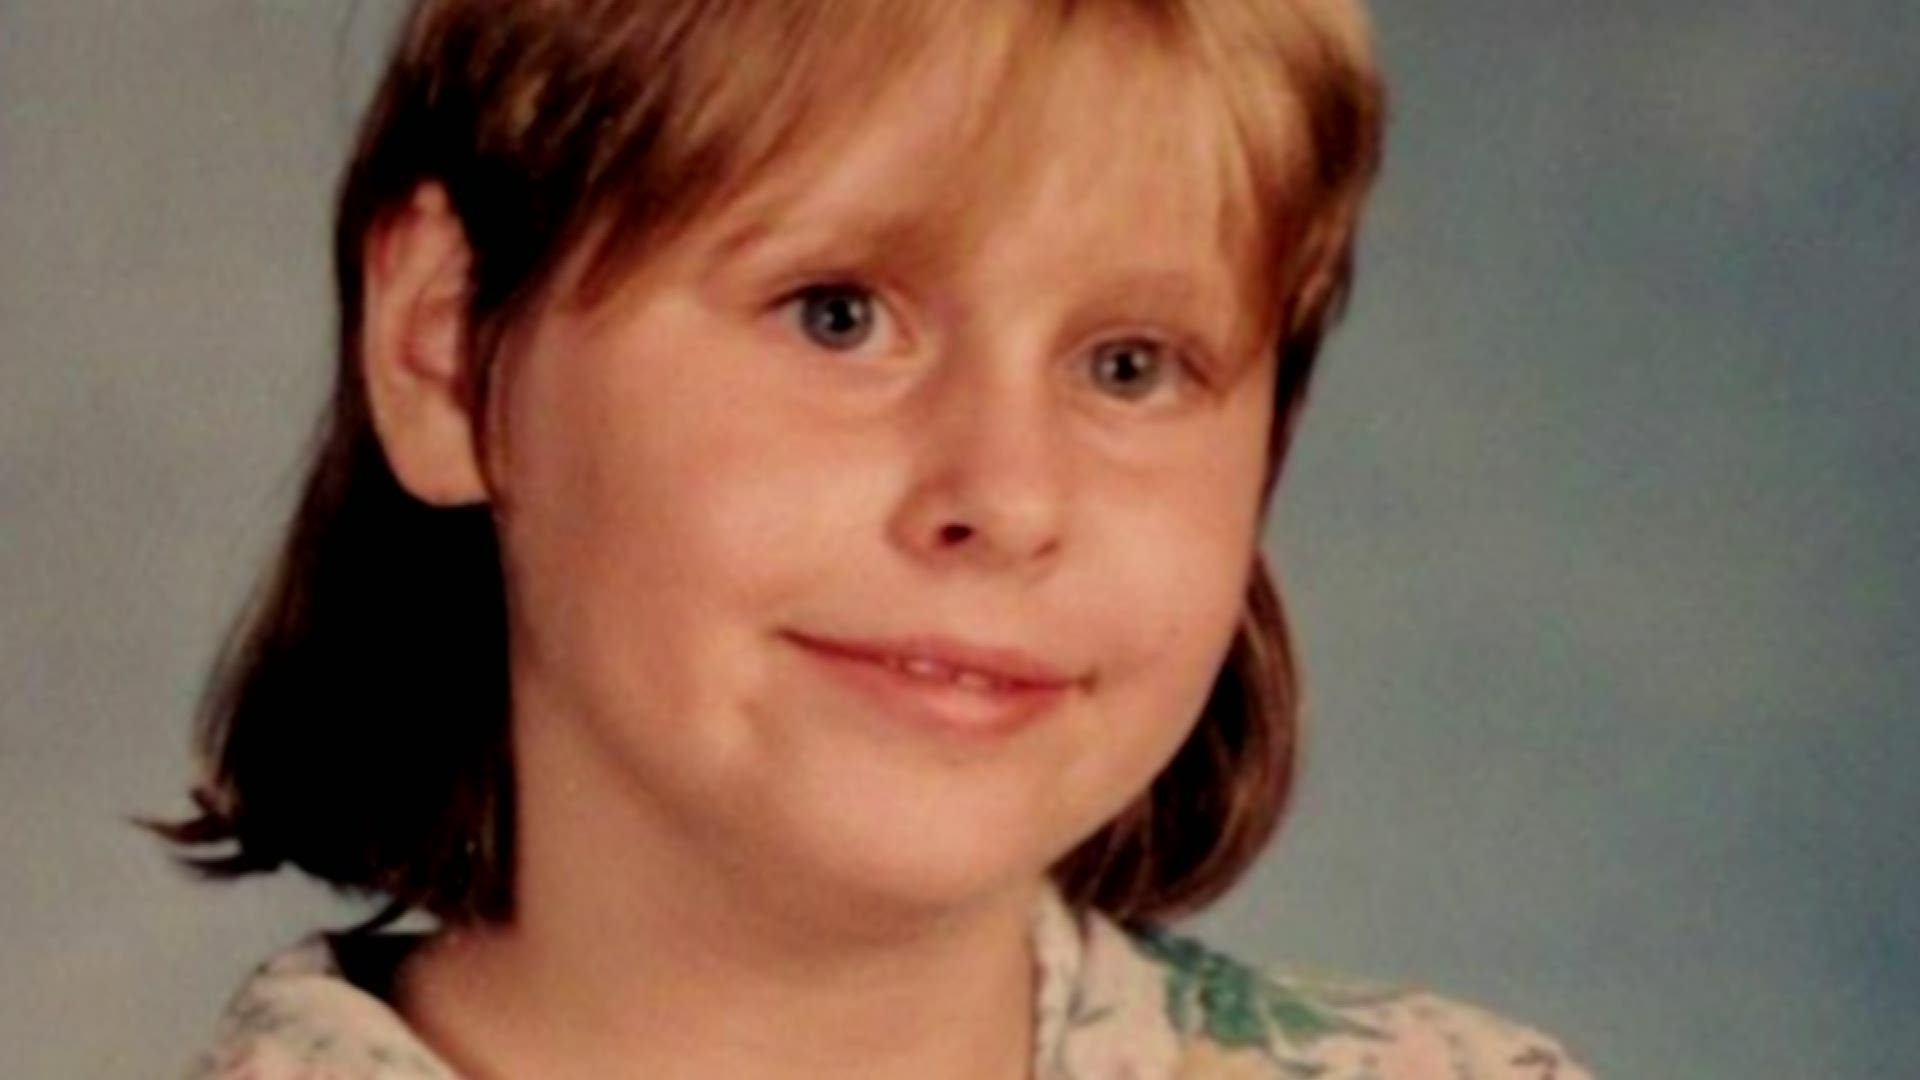 This year marks the 20th anniversary of the disappearance of Michelle Prasek in Spring. All these years later, her family is still desperate to know what happened to their 12-year-old girl.